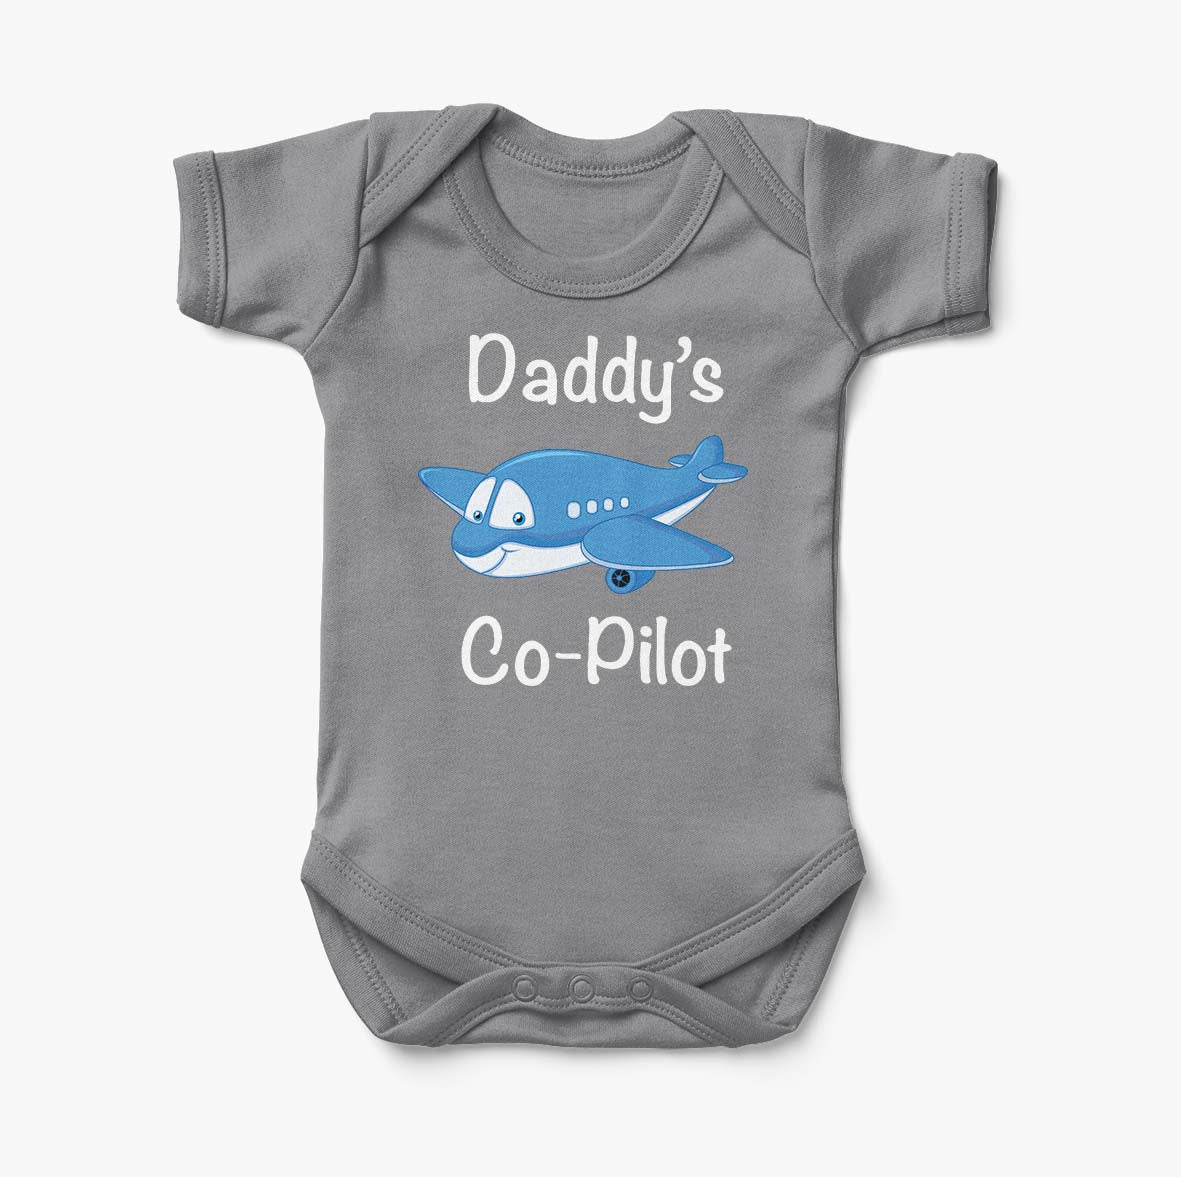 Daddy's Co-Pilot (Jet Airplane) Designed Baby Bodysuits